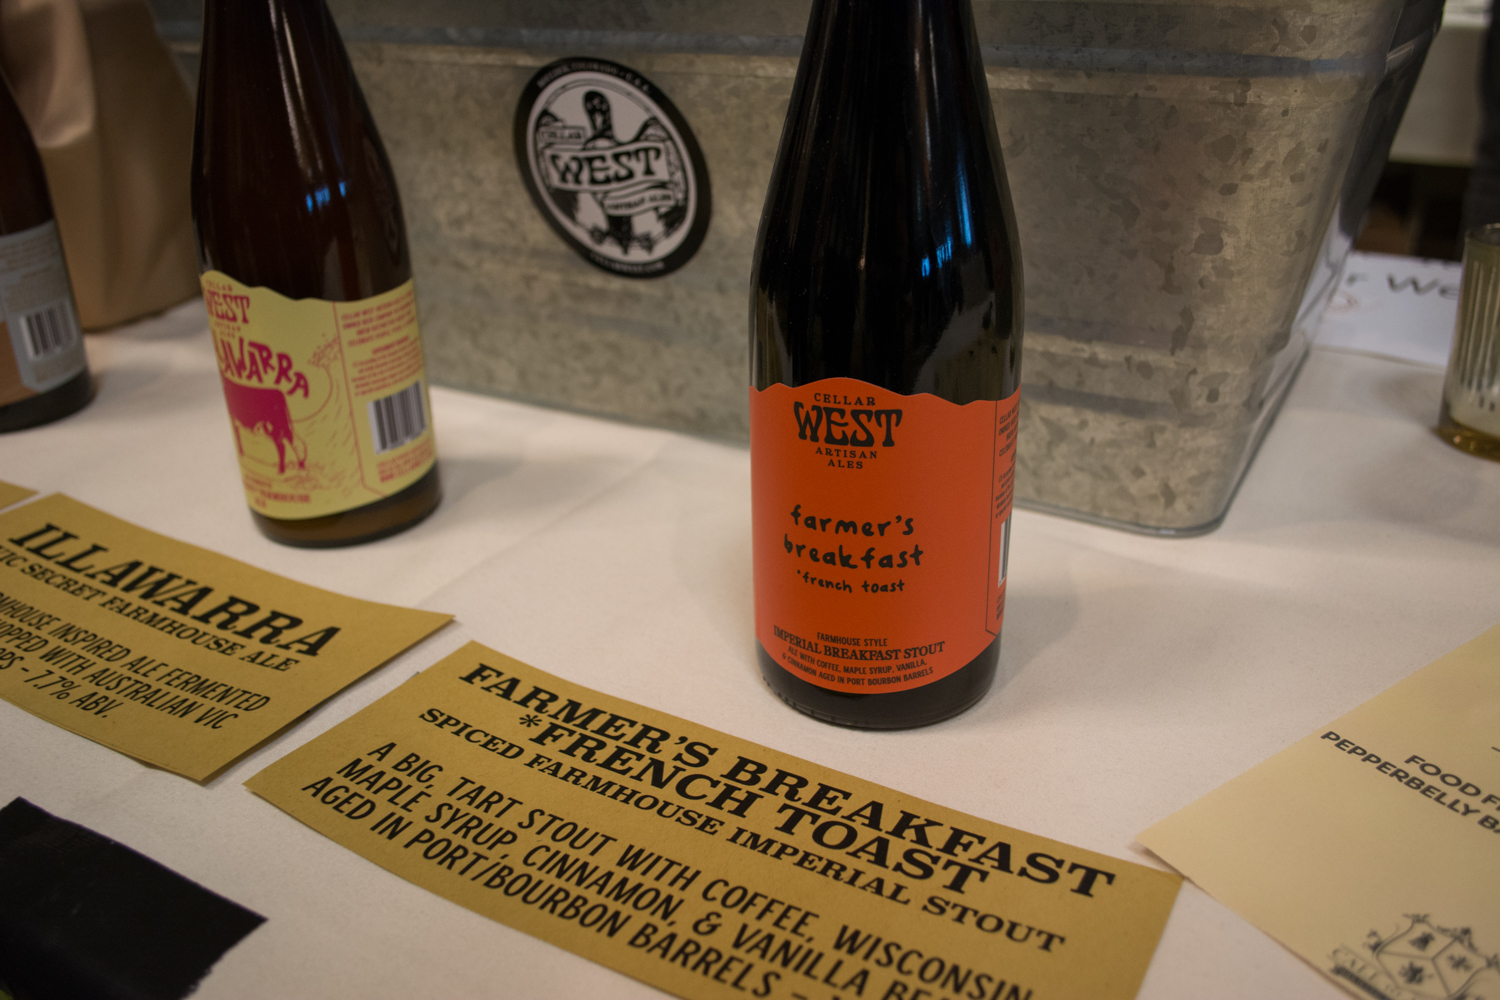  Pastry stouts were the name of the game at Big Beers 2018. Cellar West Artisanal Ales featured a fully loaded breakfast stout.&nbsp; 